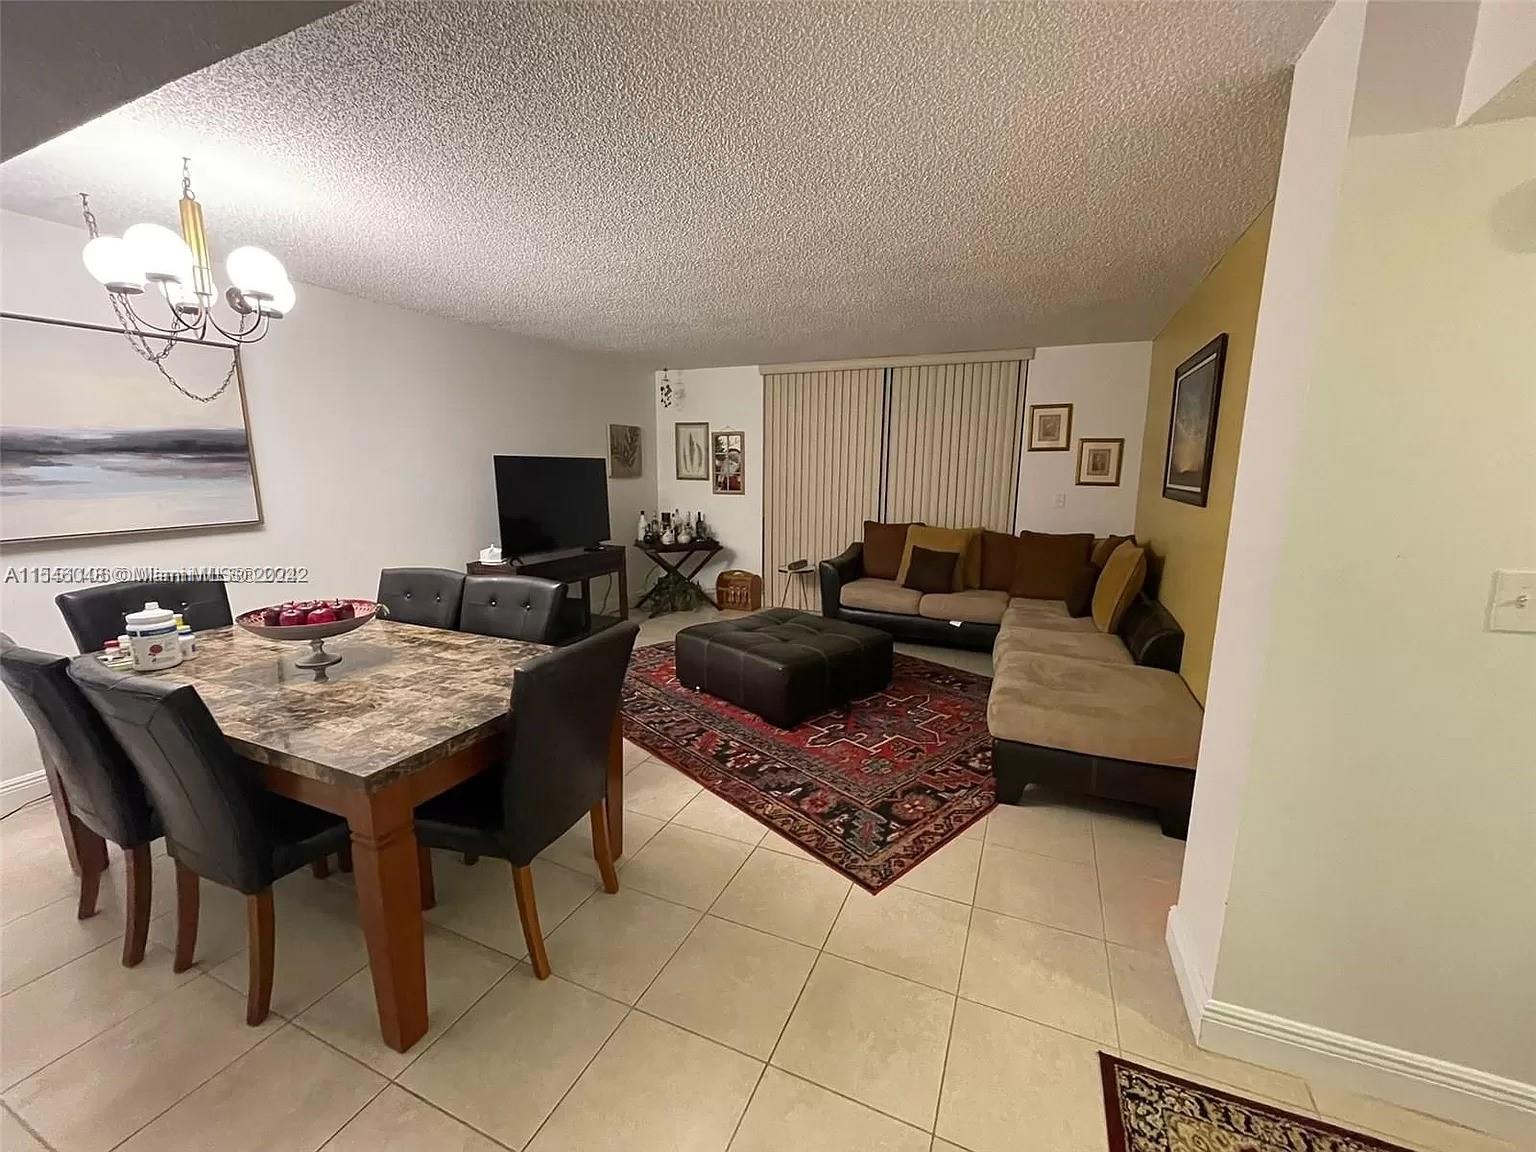 8065 SW 107th Ave 115, Miami, Florida 33173, 2 Bedrooms Bedrooms, ,2 BathroomsBathrooms,Residentiallease,For Rent,8065 SW 107th Ave 115,A11546048